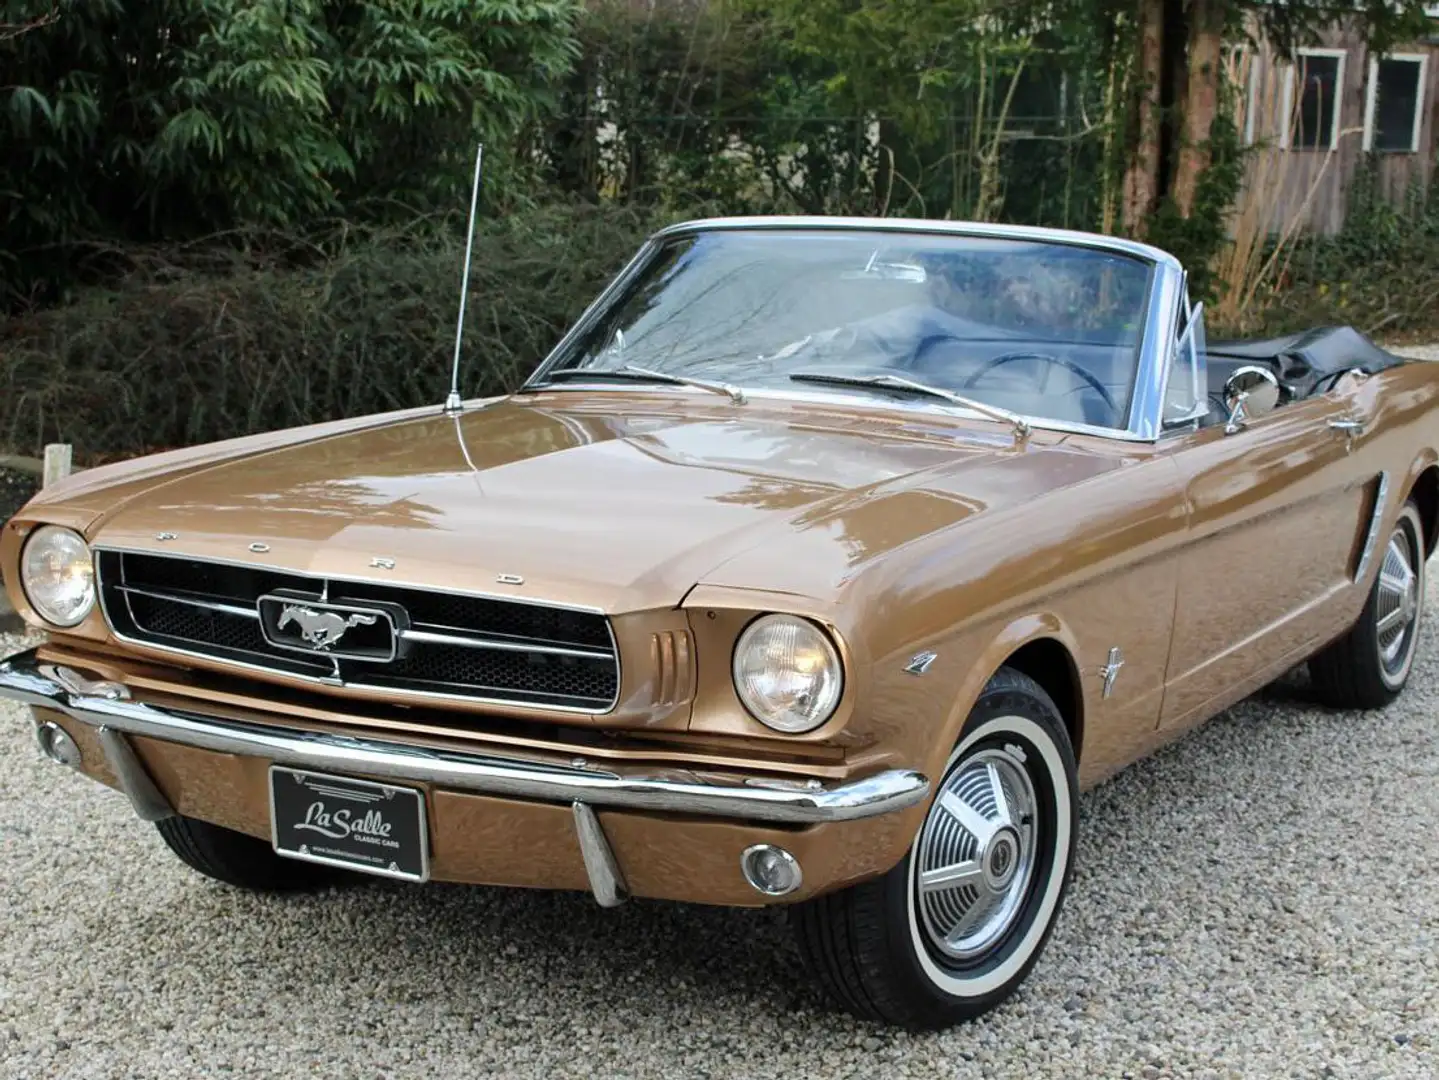 Ford Mustang 1965 289 V8 aut, Convertible Bronzo - 1